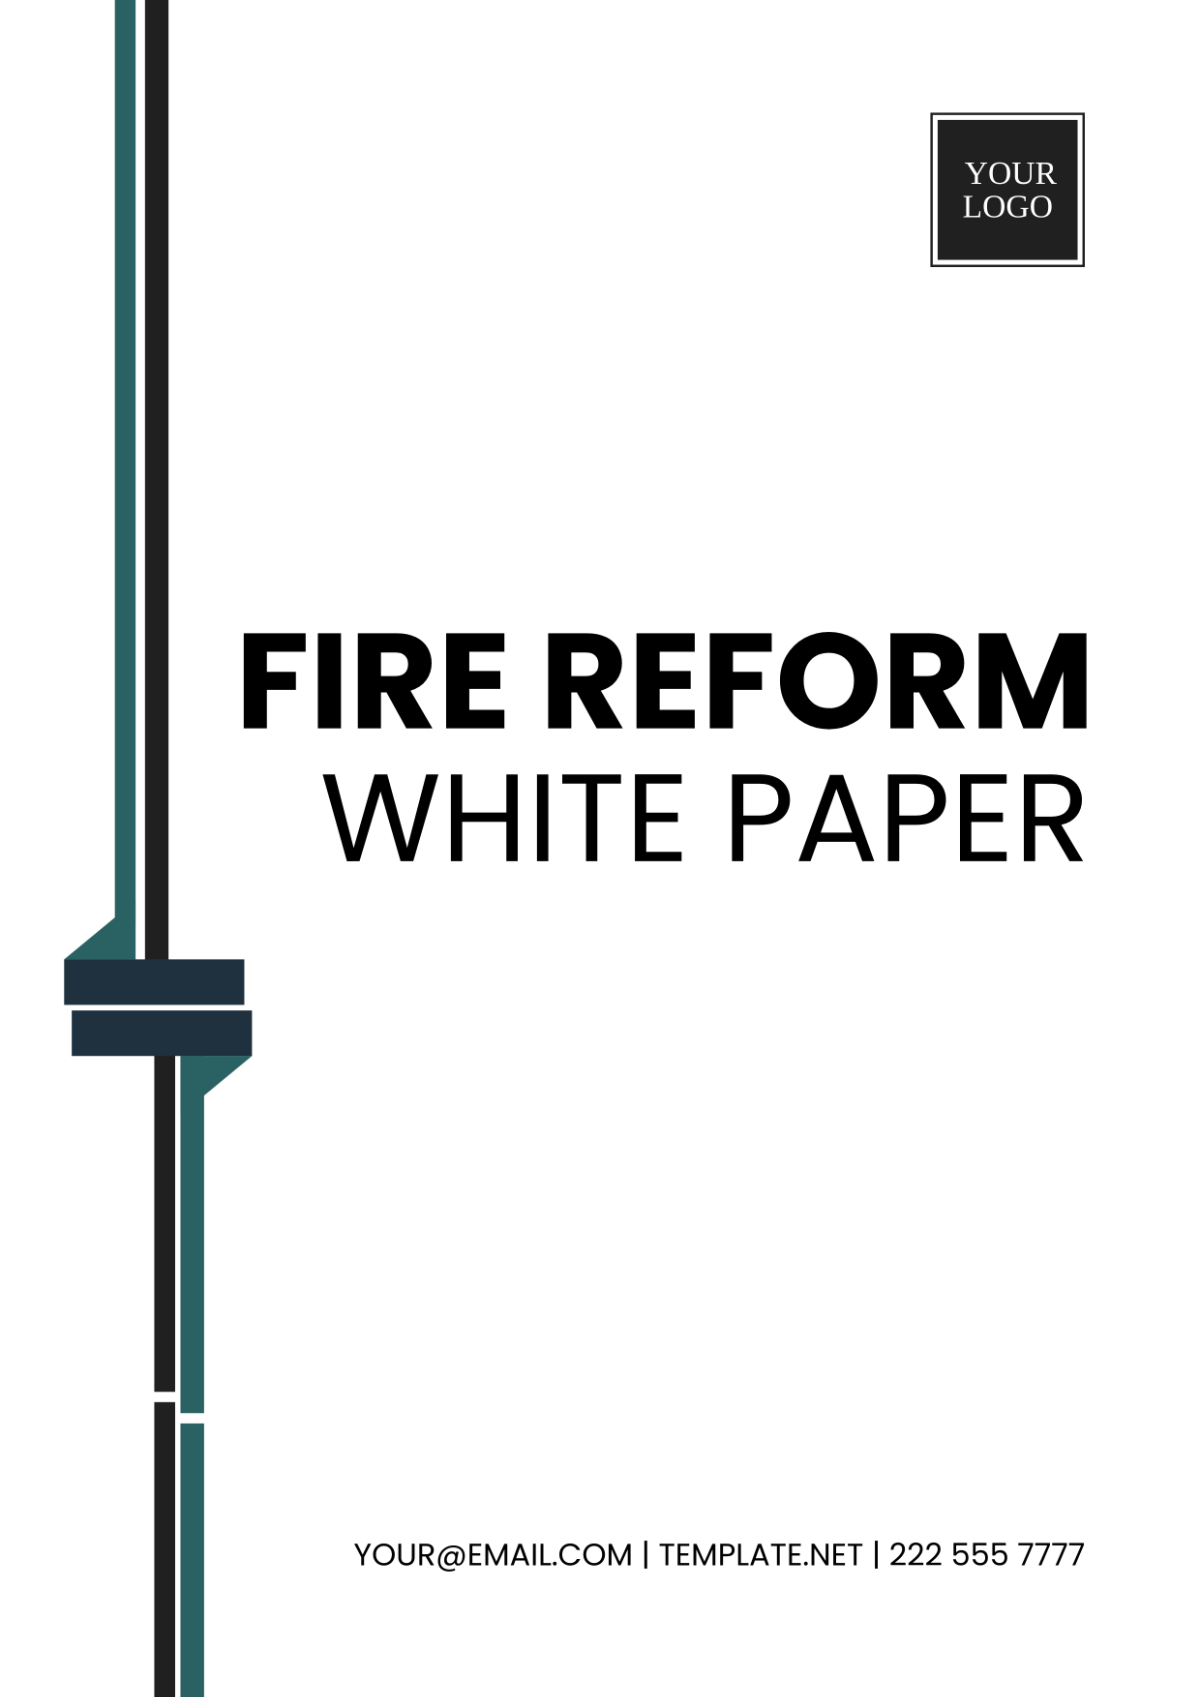 Fire Reform White Paper Template